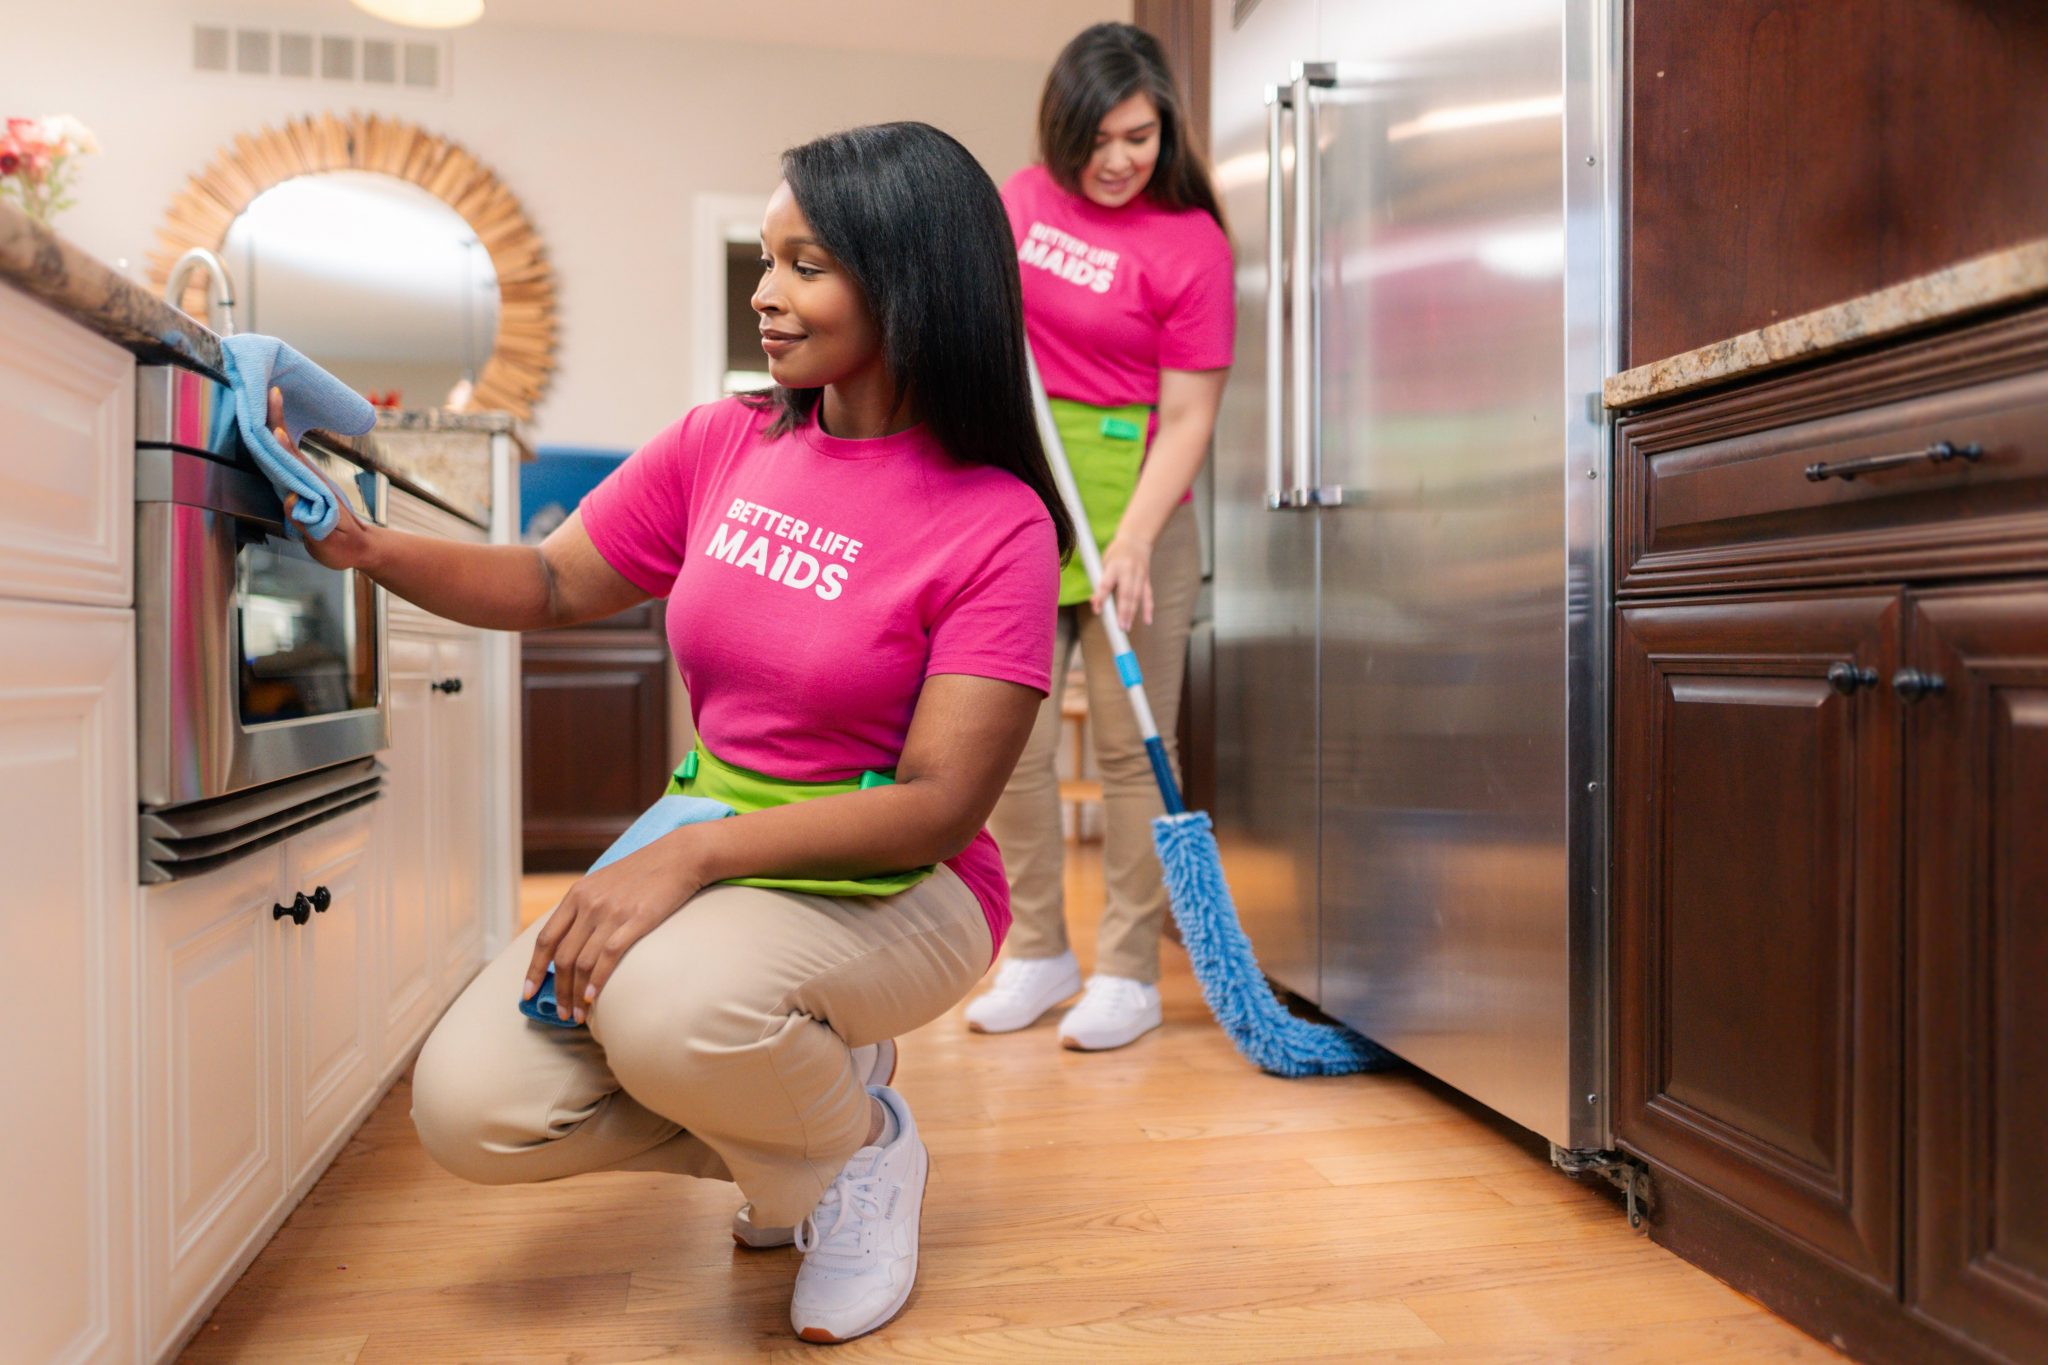 st charles county house cleaners, maids in st charles county, best maids in st charles county, maids near st charles county